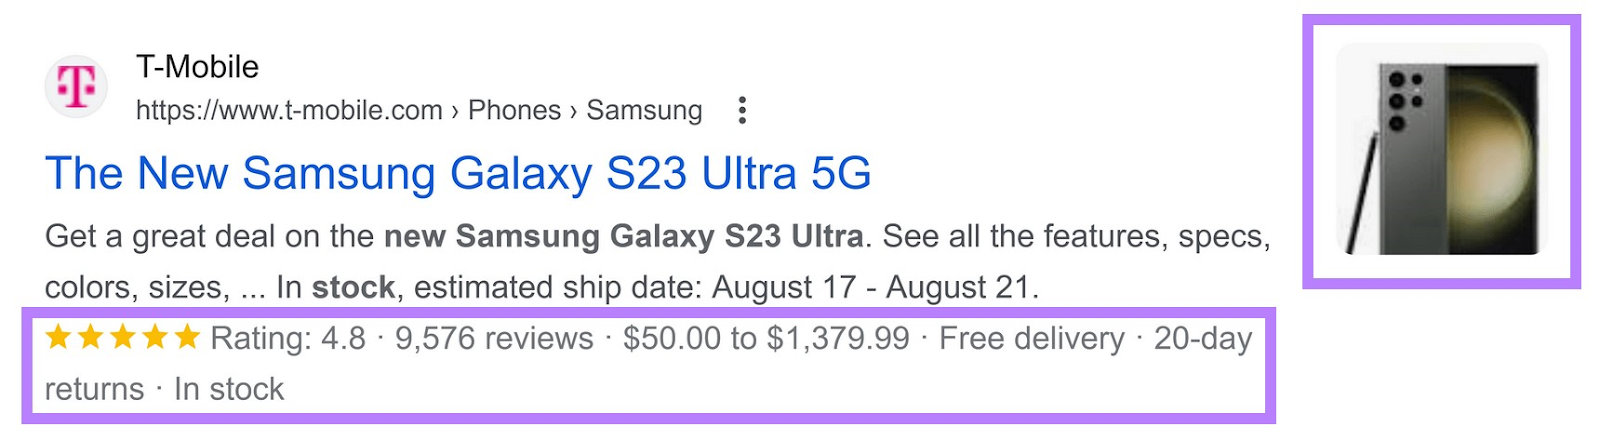 an example of a rich snippet showing rating, number of reviews, price, free delivery and returns for "The New Samsung Galaxy S23 Ultra 5G" by T-Mobile